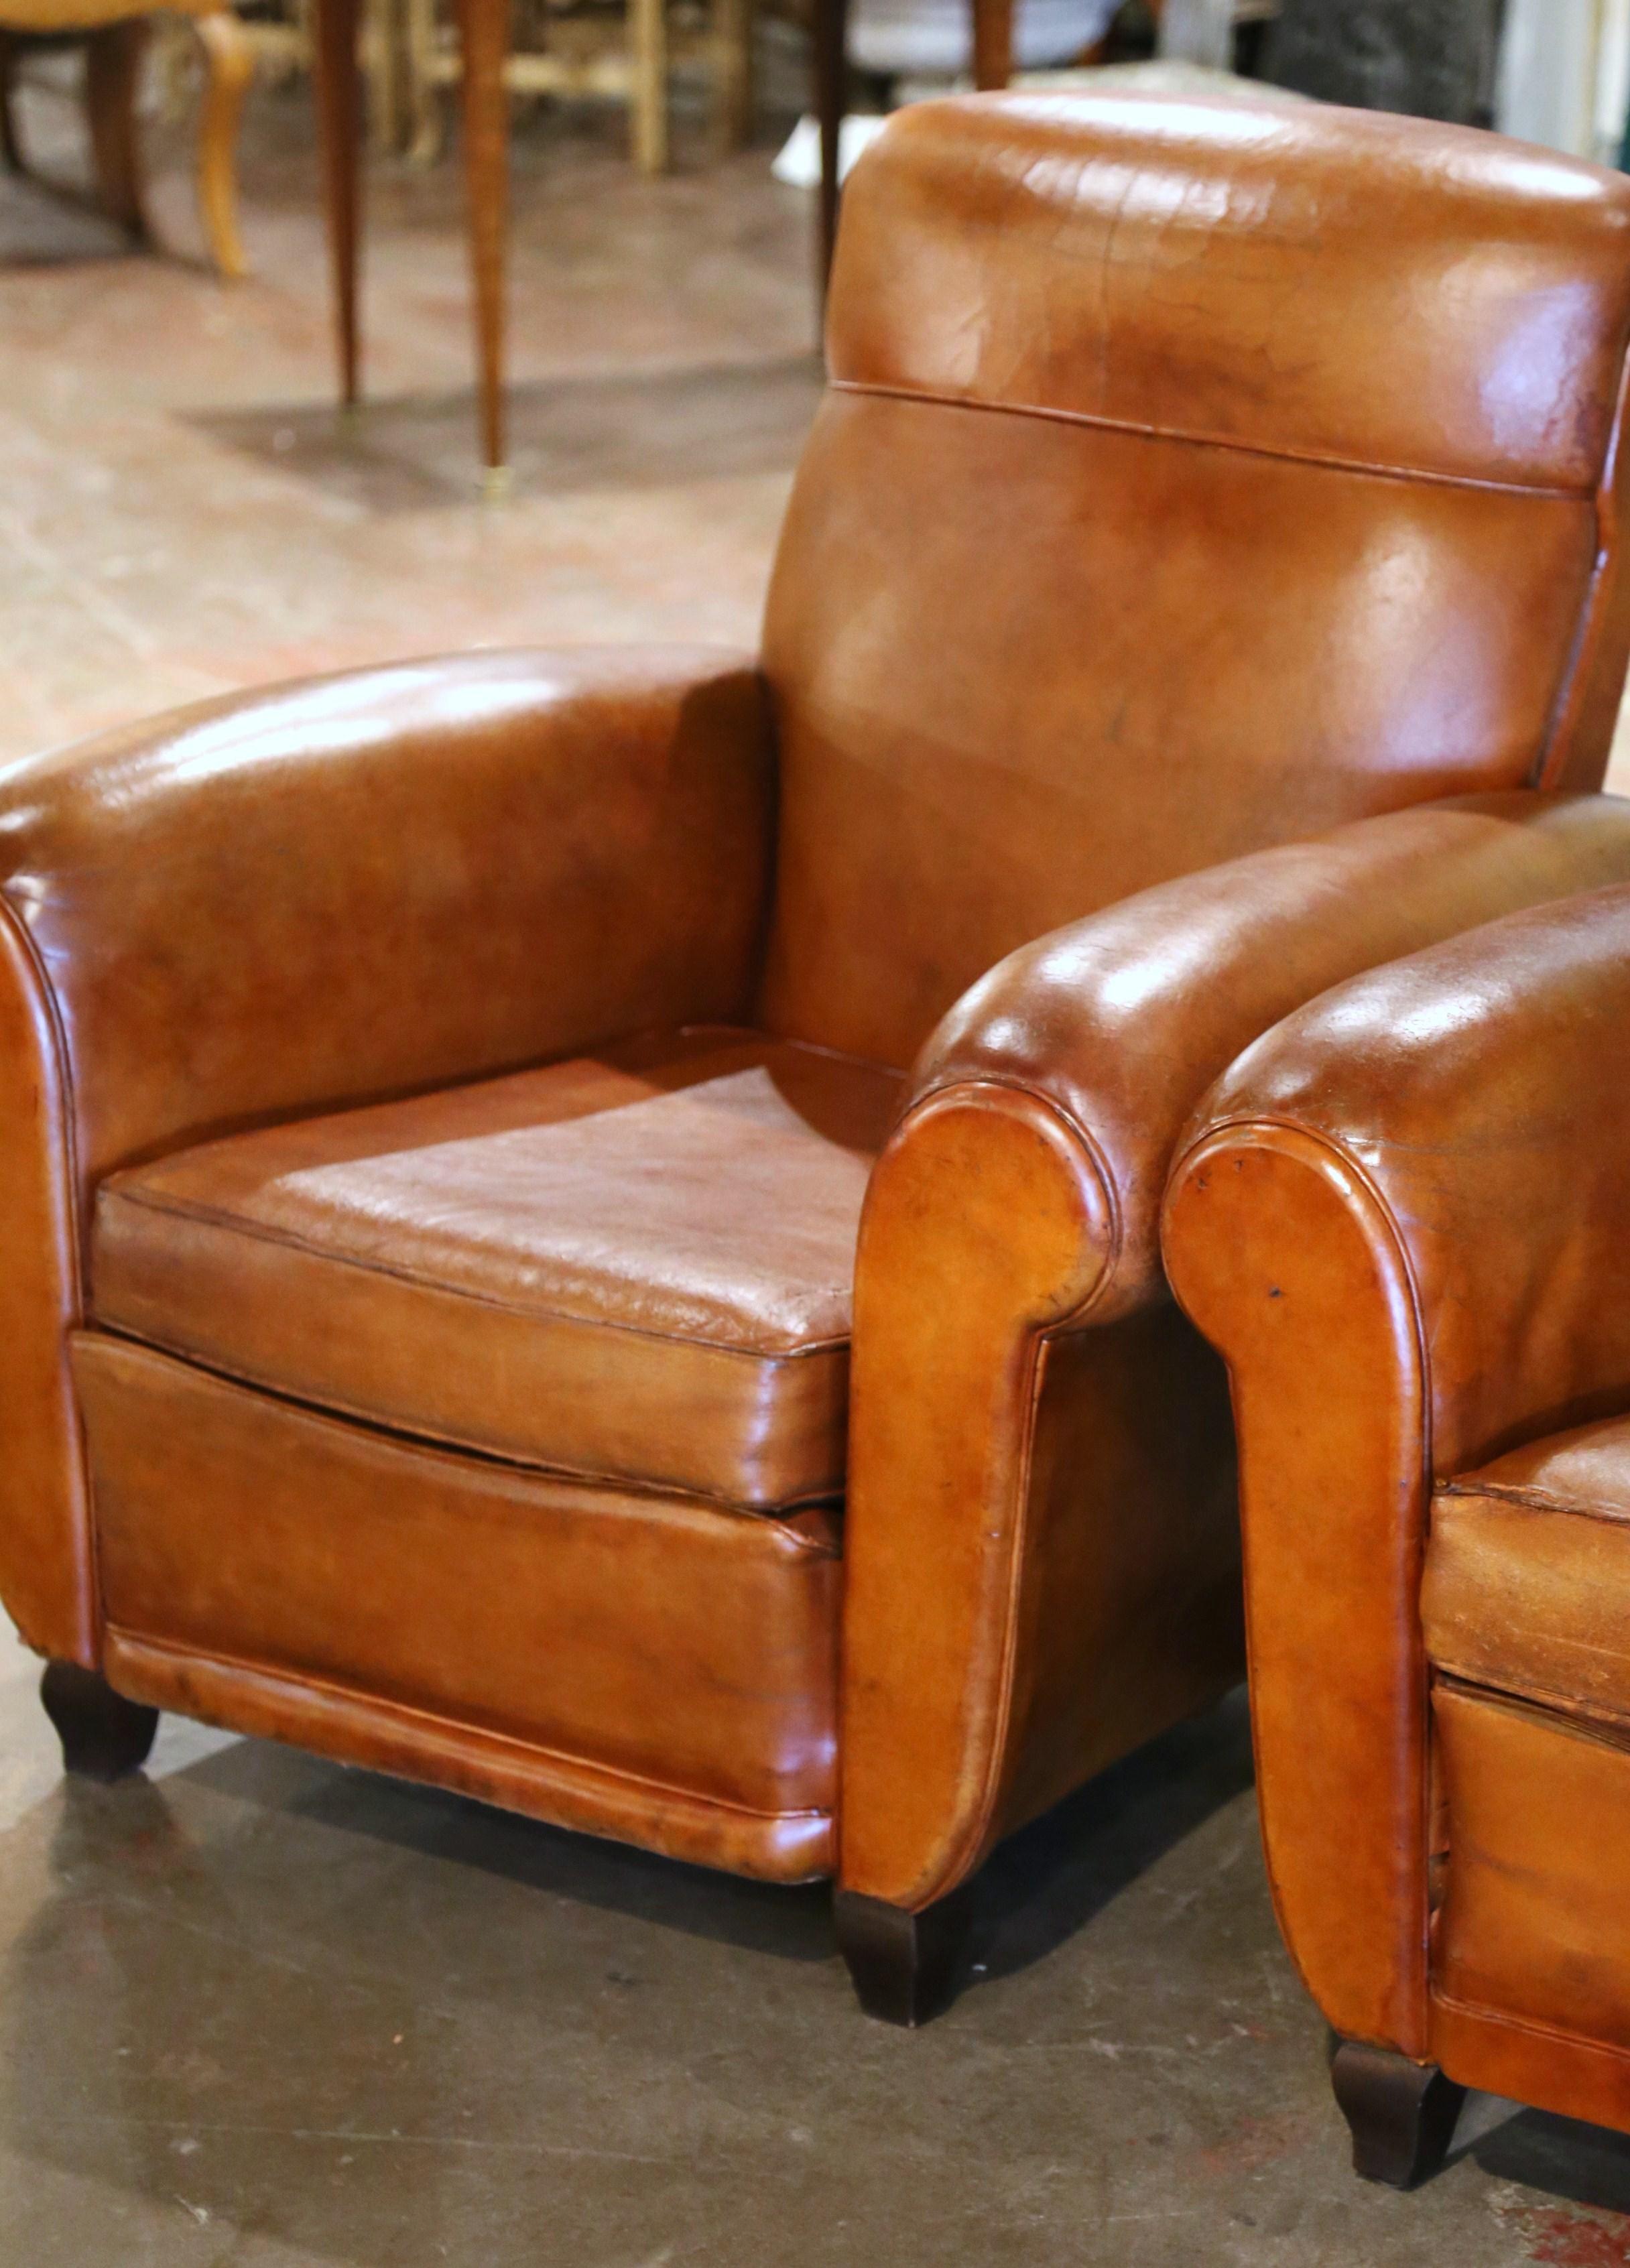 These Classic, antique Art Deco club chairs were crafted in France, circa 1920. The stately chairs feature wide, rounded armrests, a pitch back with an arched top shape, and square wooden feet at the base. The Classic, masculine French chairs are